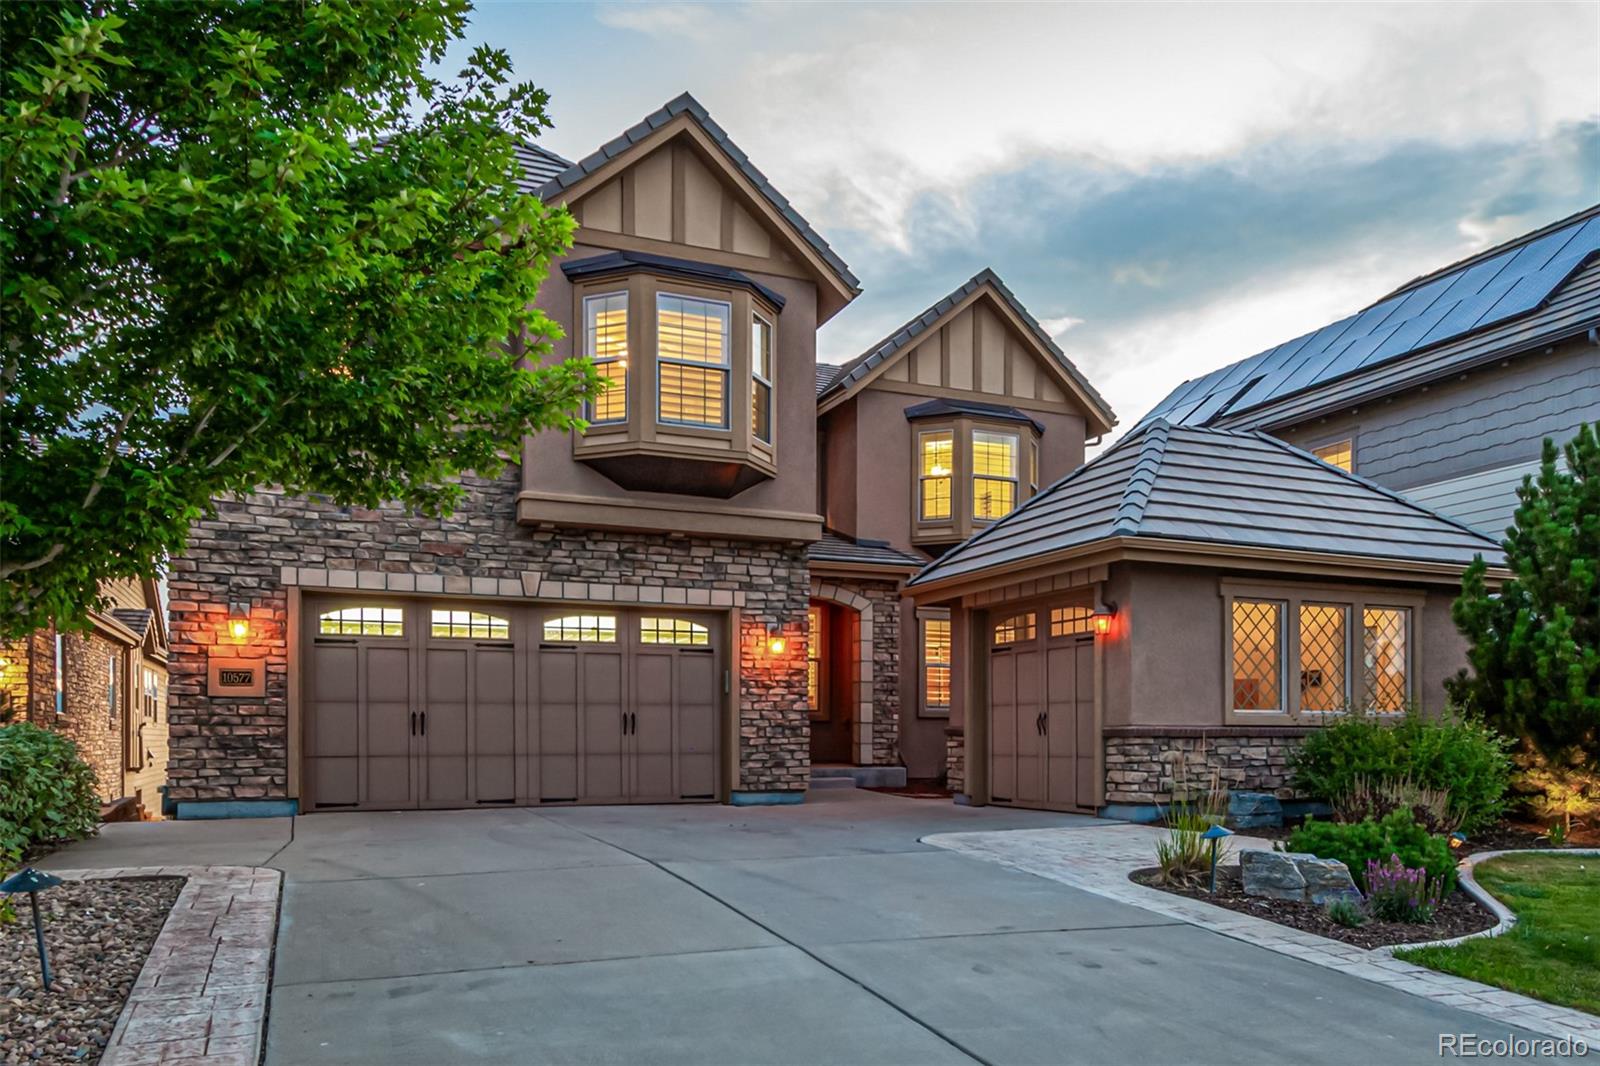 10577  Summersong Way, highlands ranch MLS: 3975861 Beds: 5 Baths: 5 Price: $1,600,000